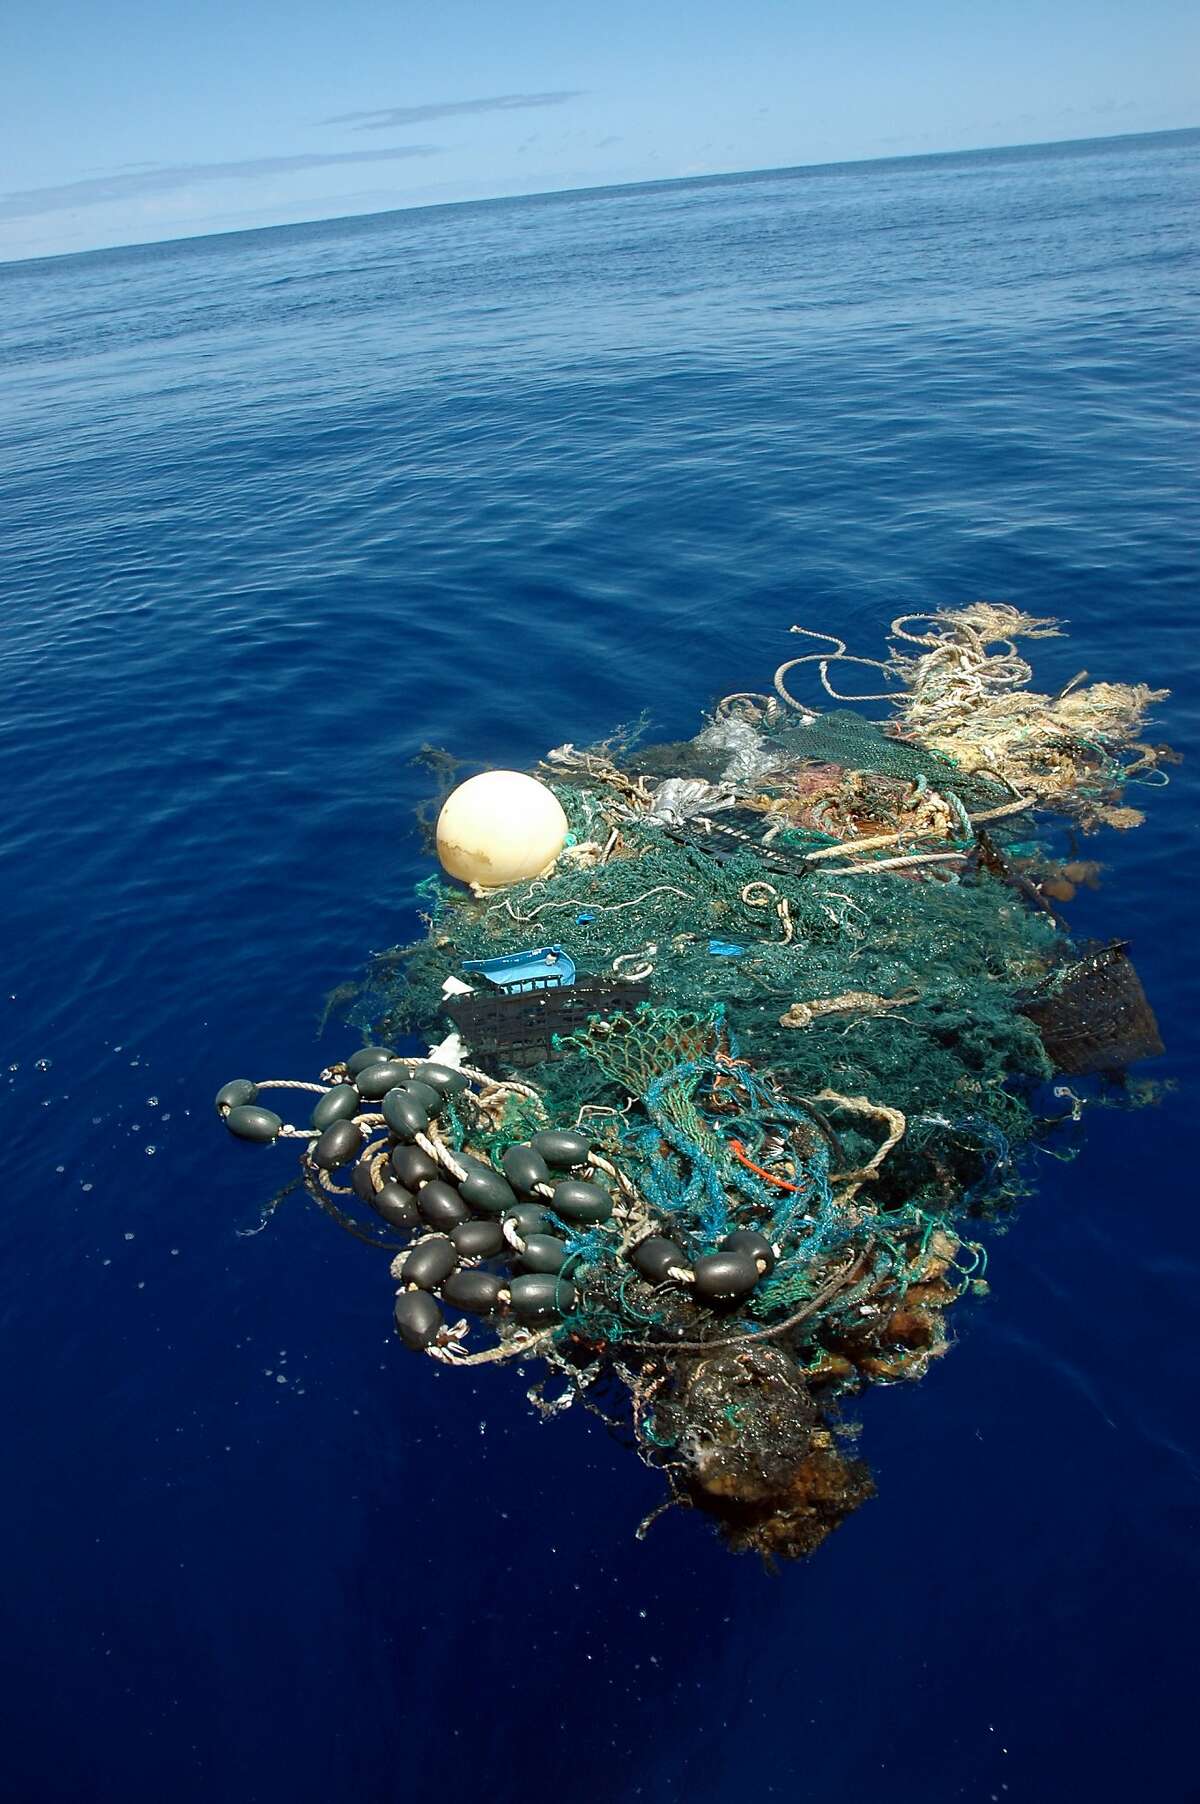 FILE- This Aug. 11, 2009 file image provided by the Scripps Institution of Oceanography shows a patch of sea garbage at sea in the Pacific Ocean. A study released by the Proceedings of the National Academy of Sciences on Monday, June 30, 2014, estimated the total amount of floating plastic debris in open ocean at 7,000 to 35,000 tons. The results of the study showed fewer very small pieces than expected. (AP Photo/ Scripps Institution of Oceanography, Mario Aguilera, File) NO SALES